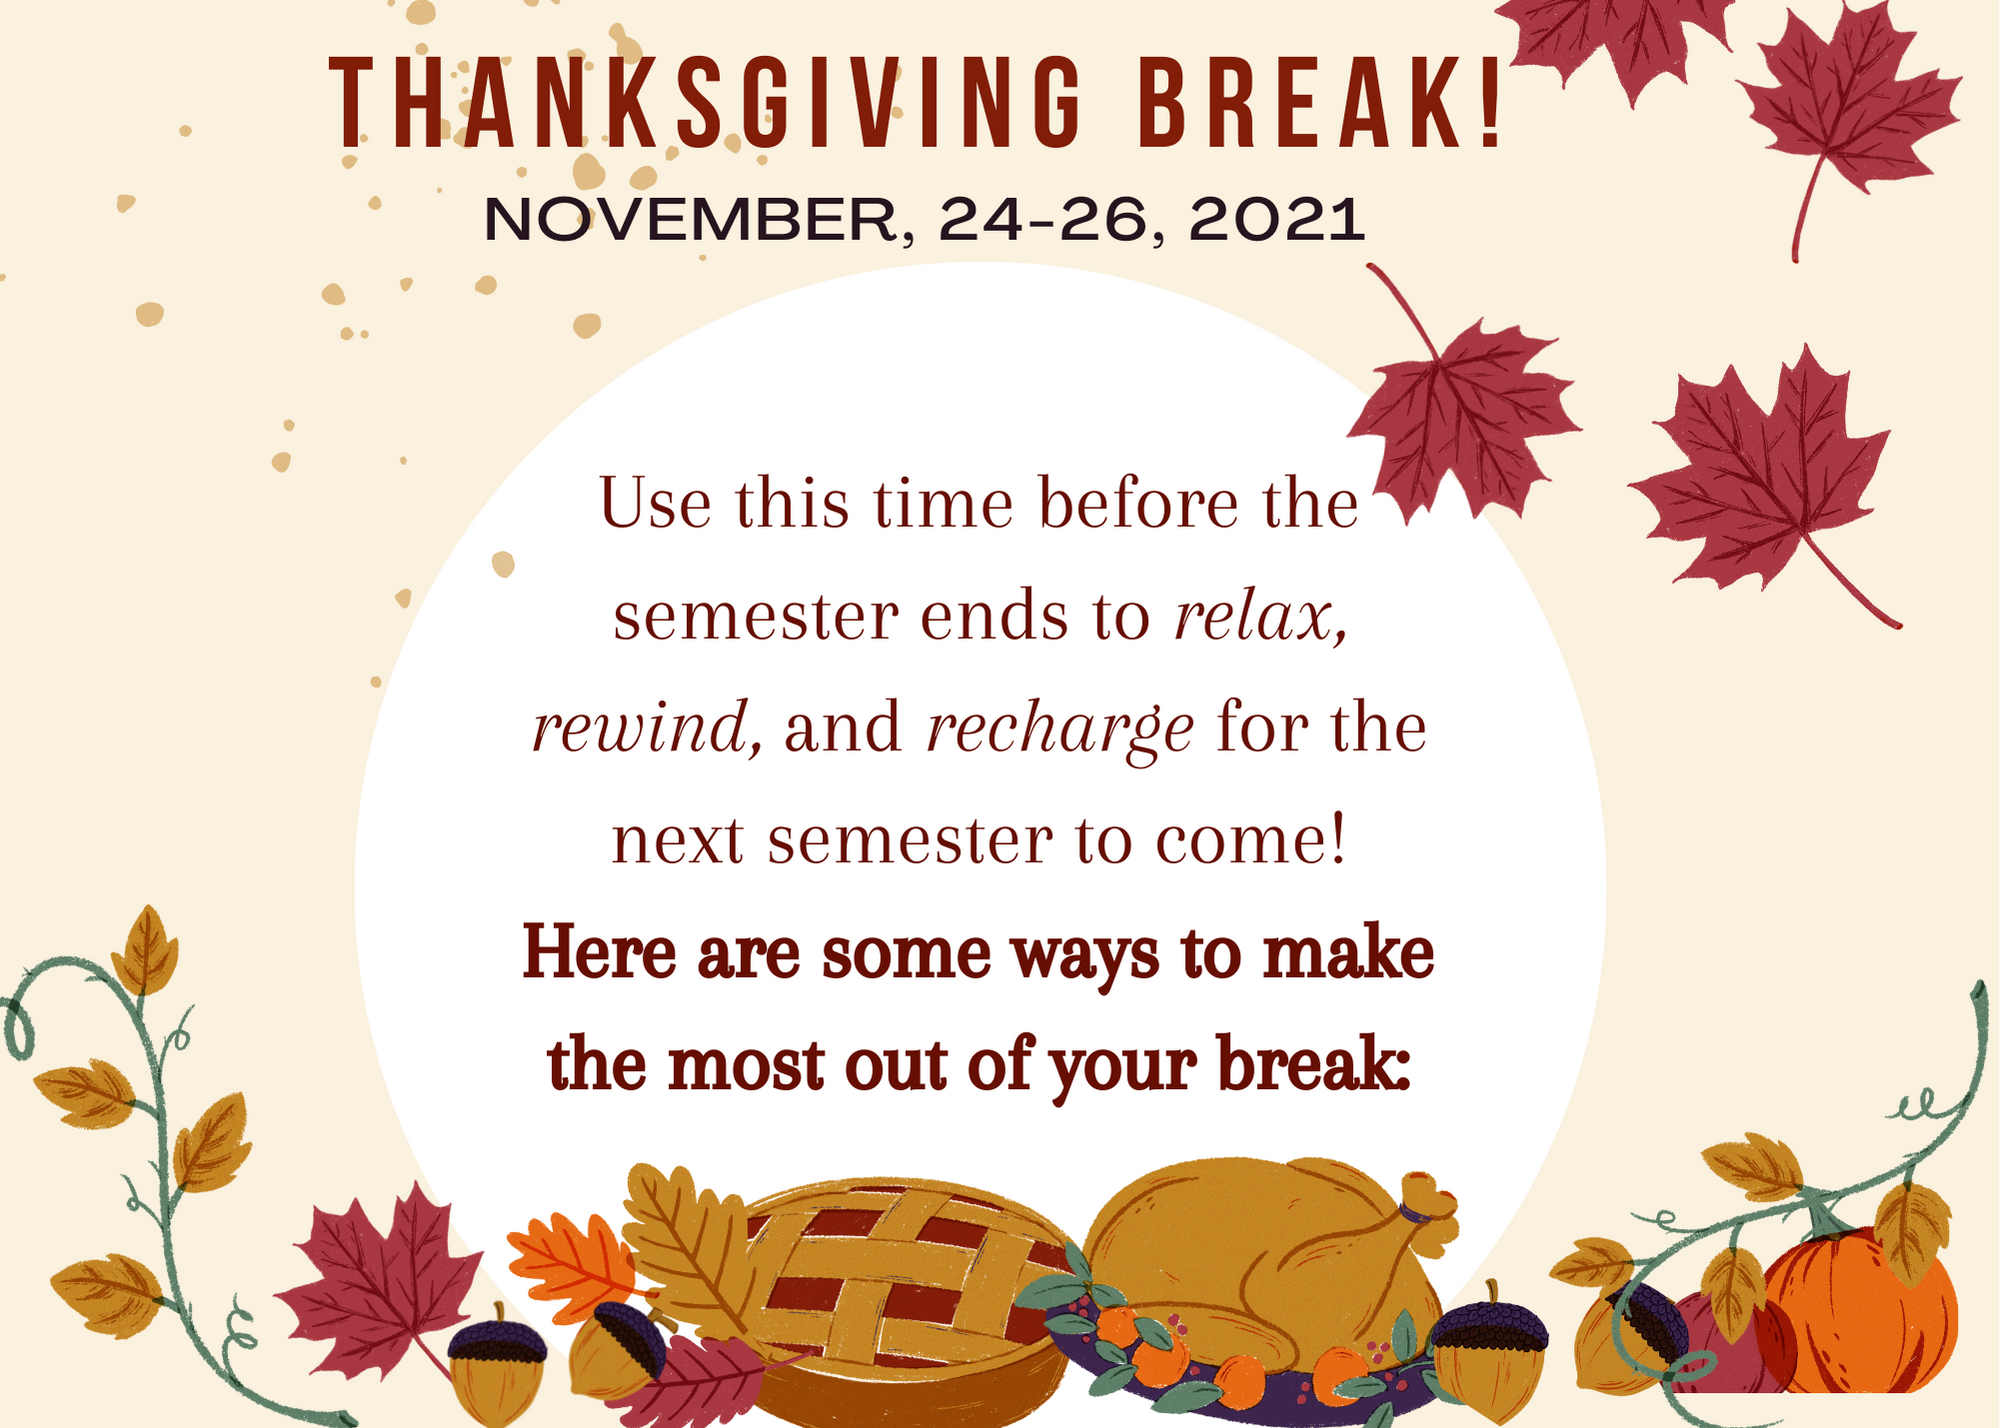 Make the most of this Thanksgiving break! Announce University of